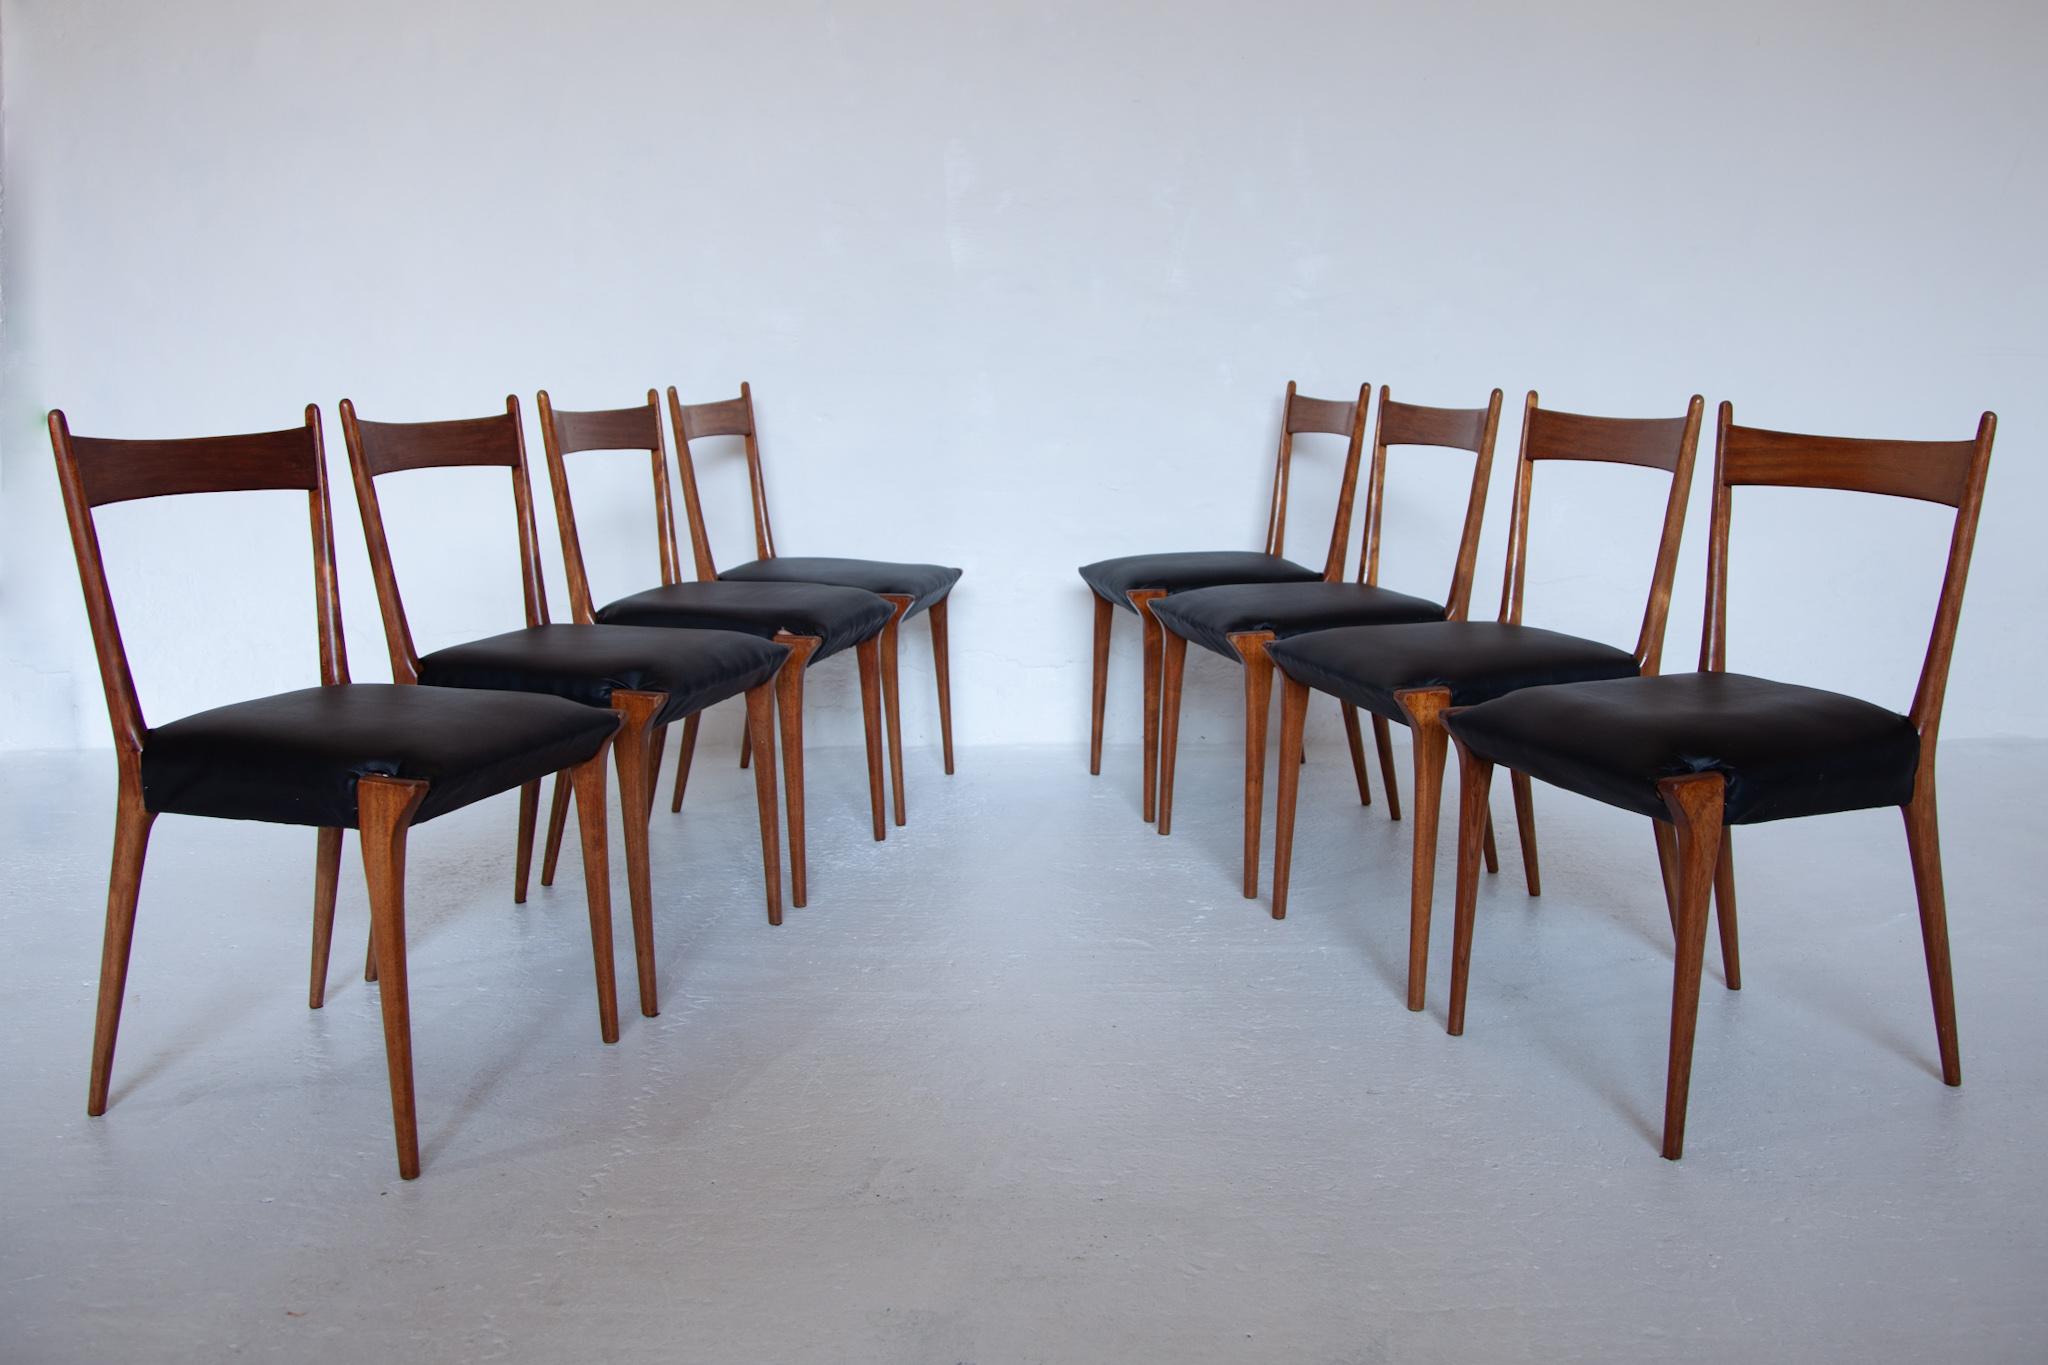 Set of eight very rare Model S2 chairs designed by Alfred Hendrickx in 1958 for Belform.
Although the chairs look very fragile but they are very solid in their construction. The wood silhouette is very cleverly done while the top part looks very